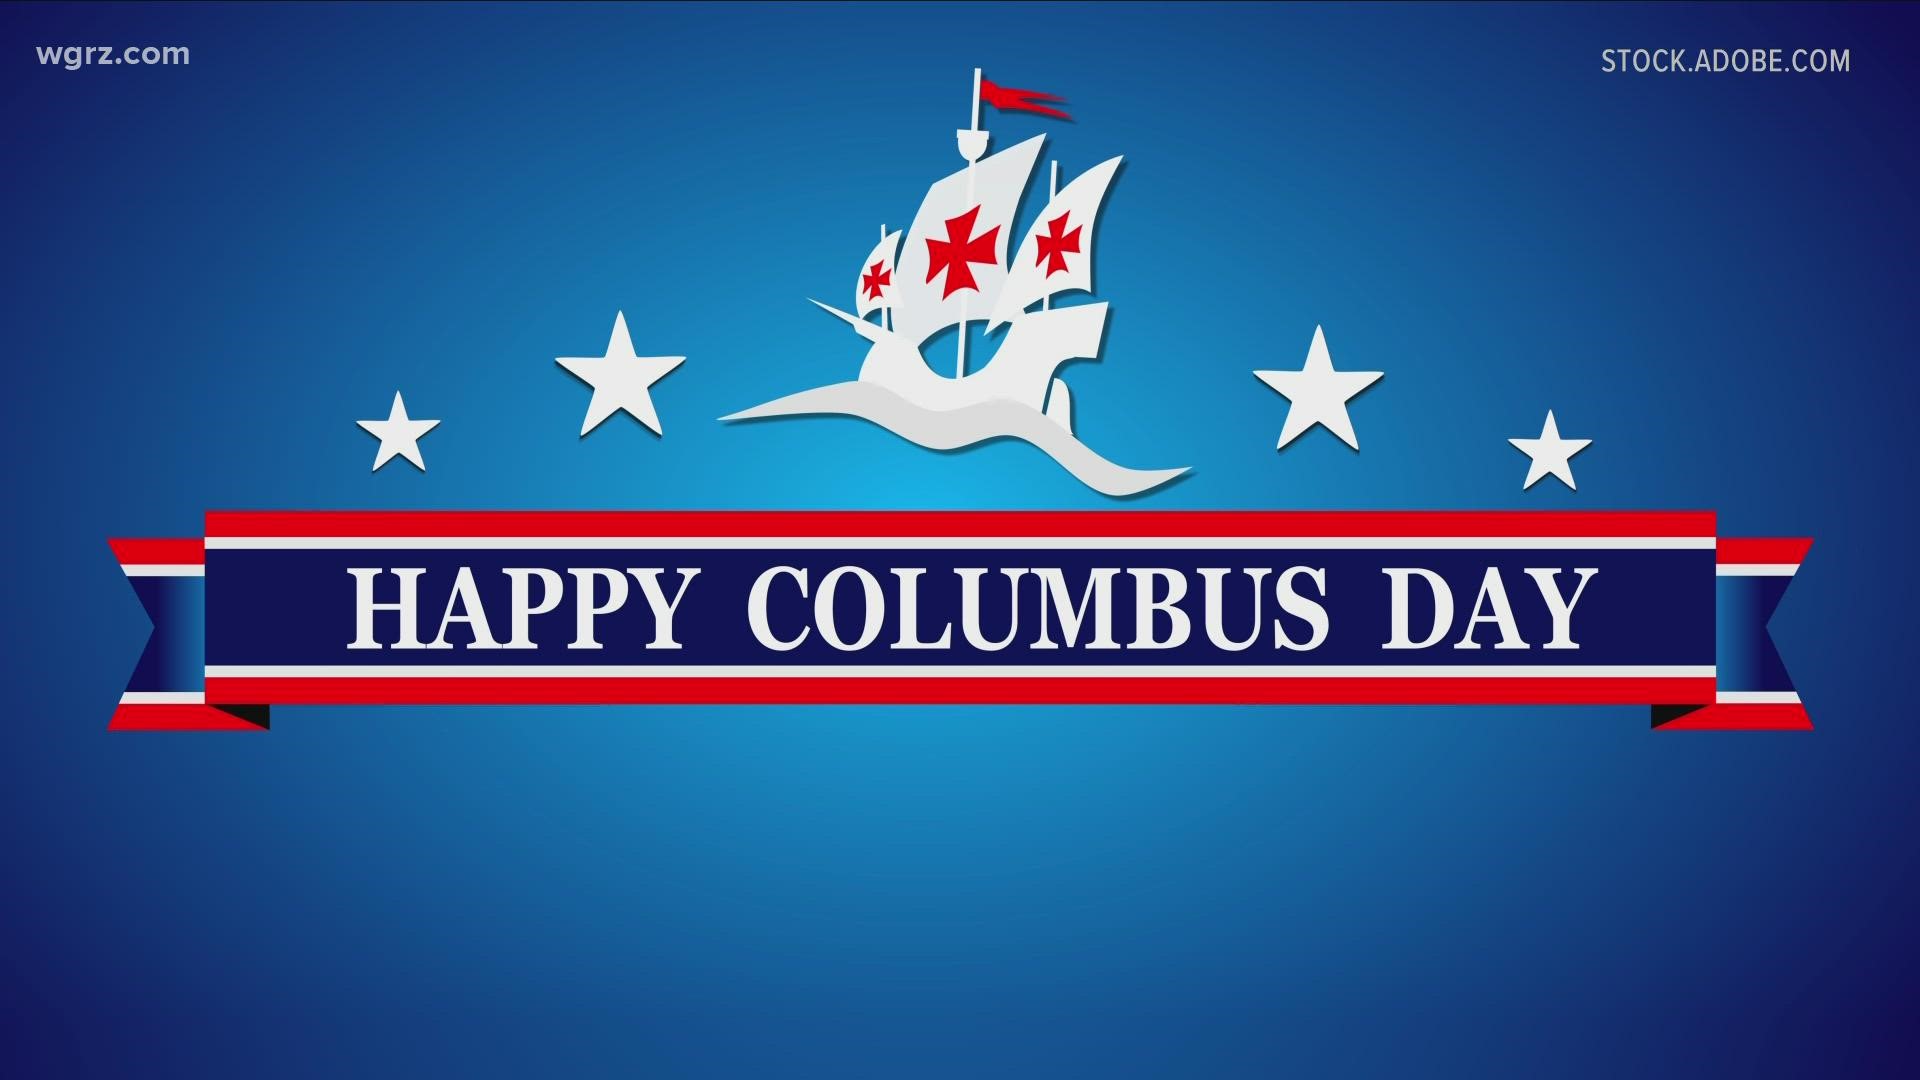 More and more places are replacing "Columbus Day" festivities with events honoring Italian American heritage generally or instead honoring "Indigenous Peoples."